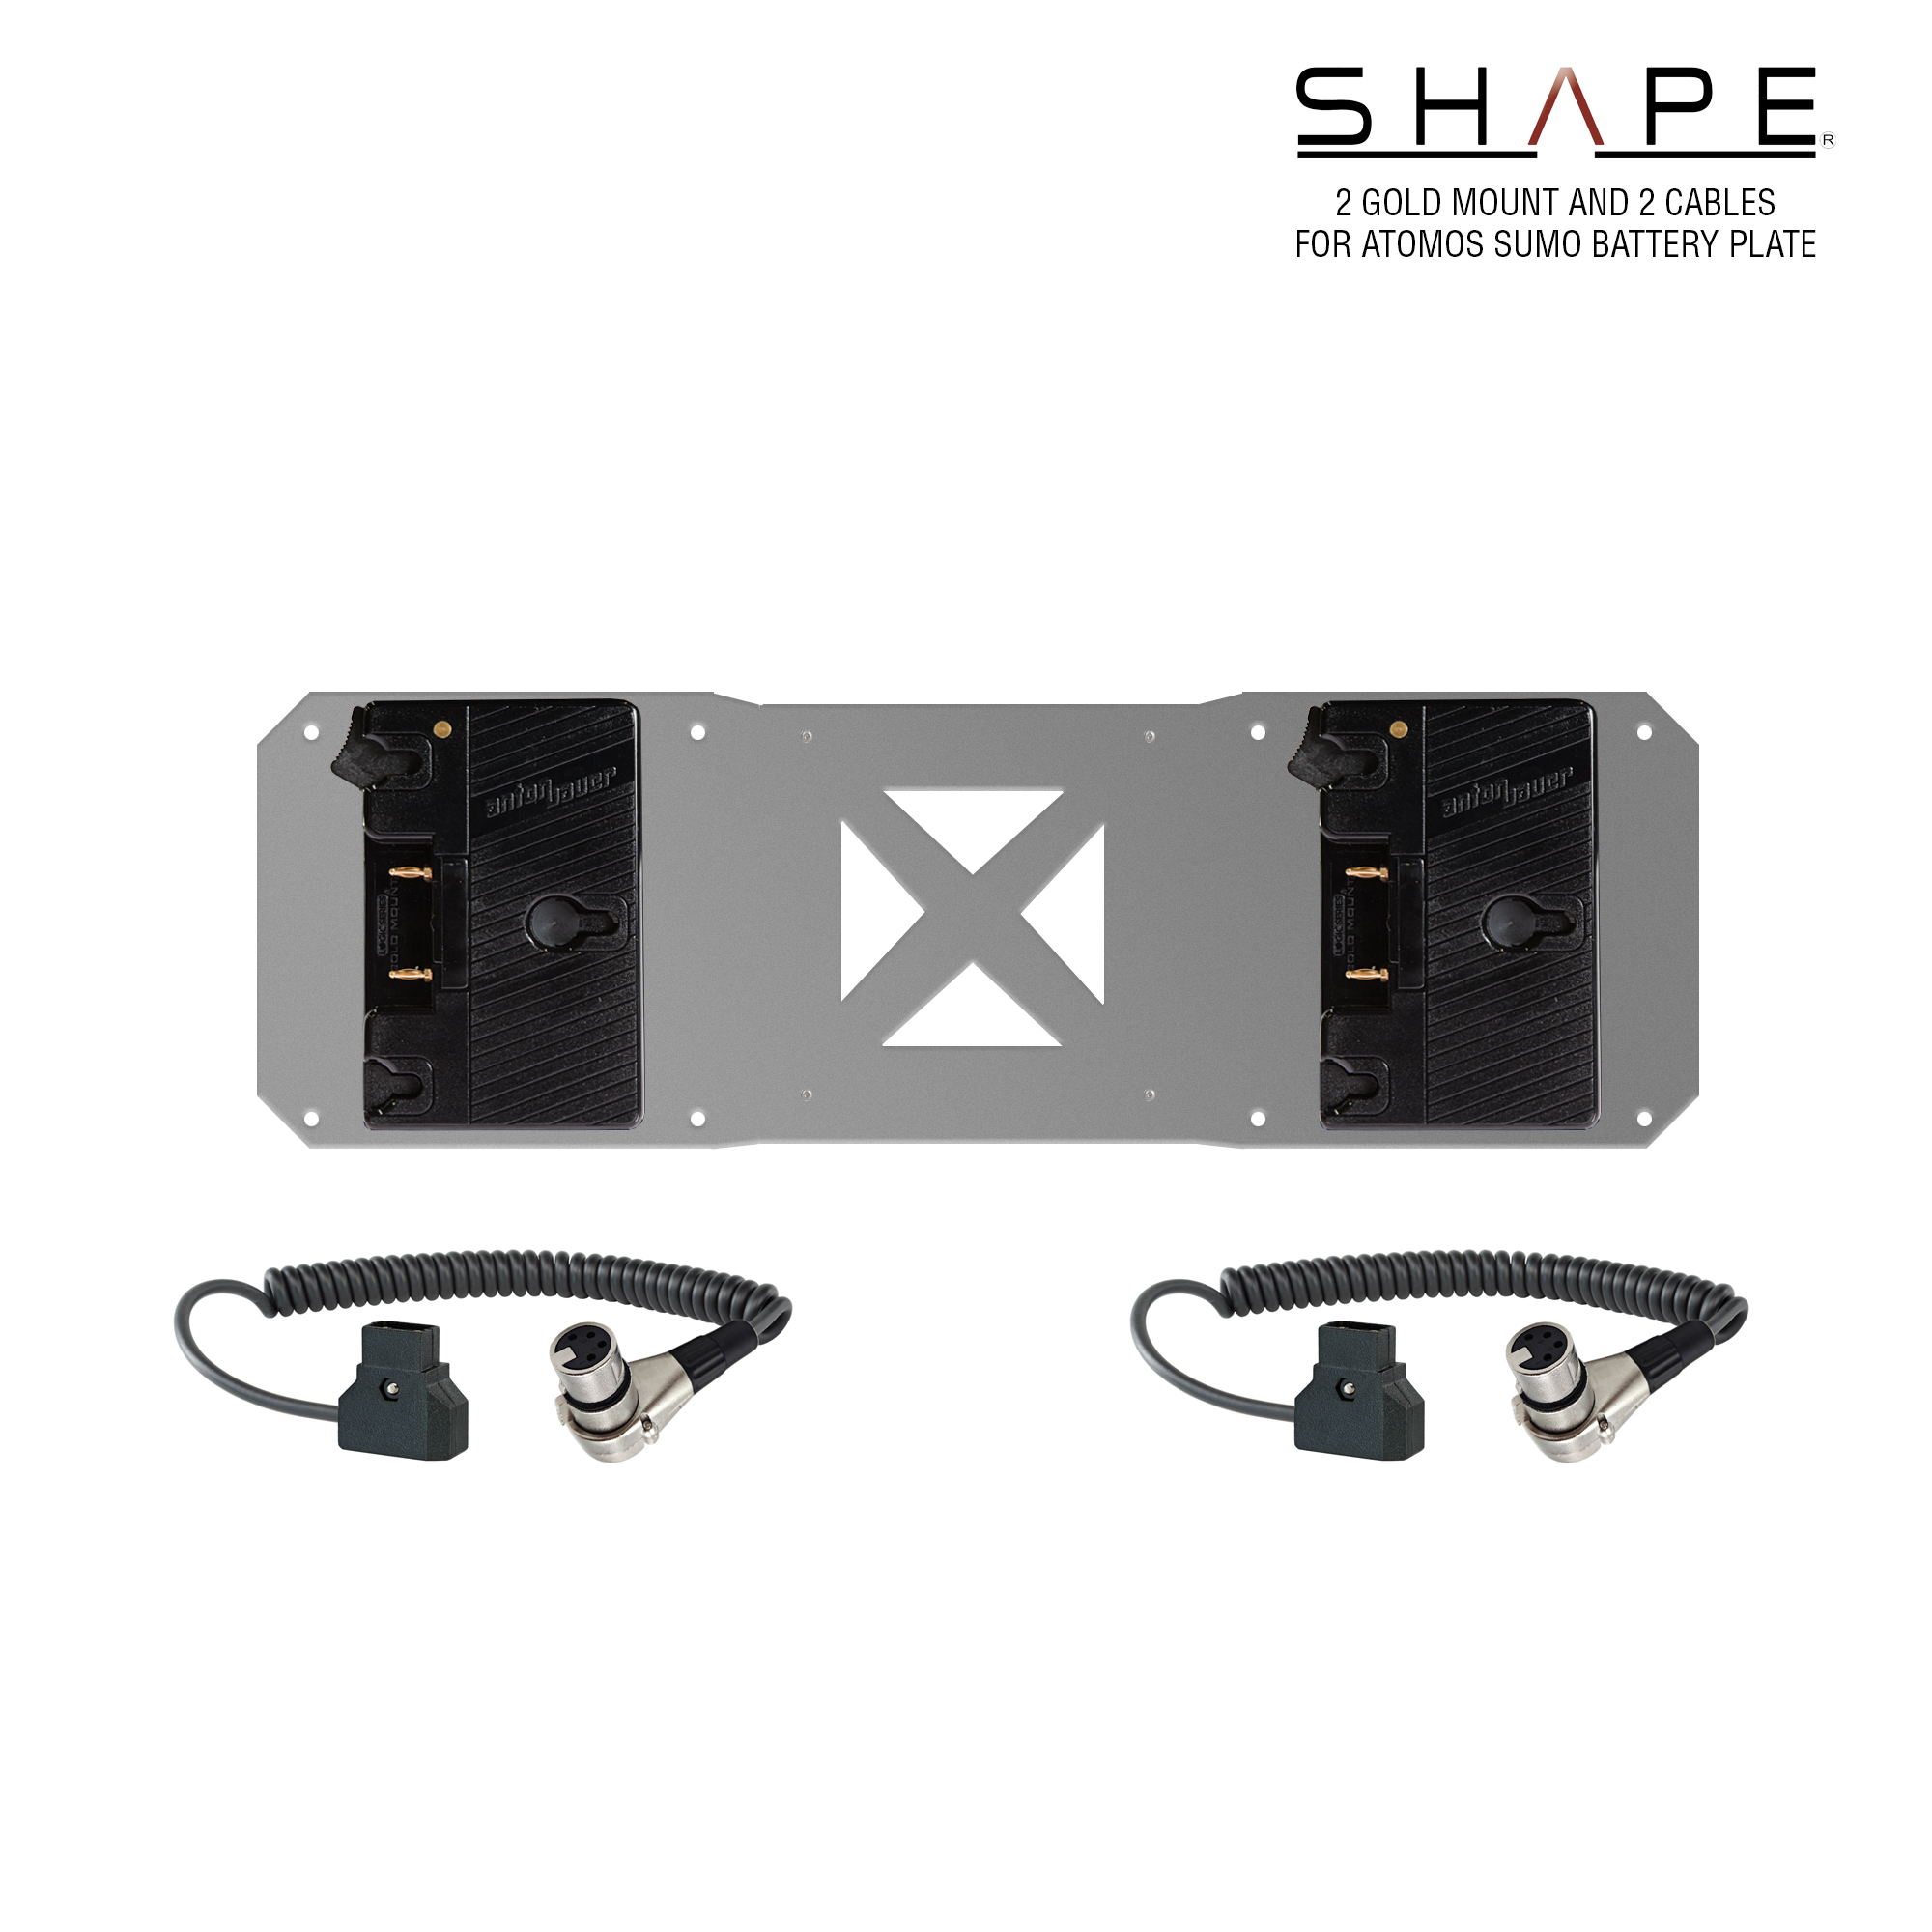 Shape GOLD MOUNT BATTERY PLATES AND CABLE KIT FOR